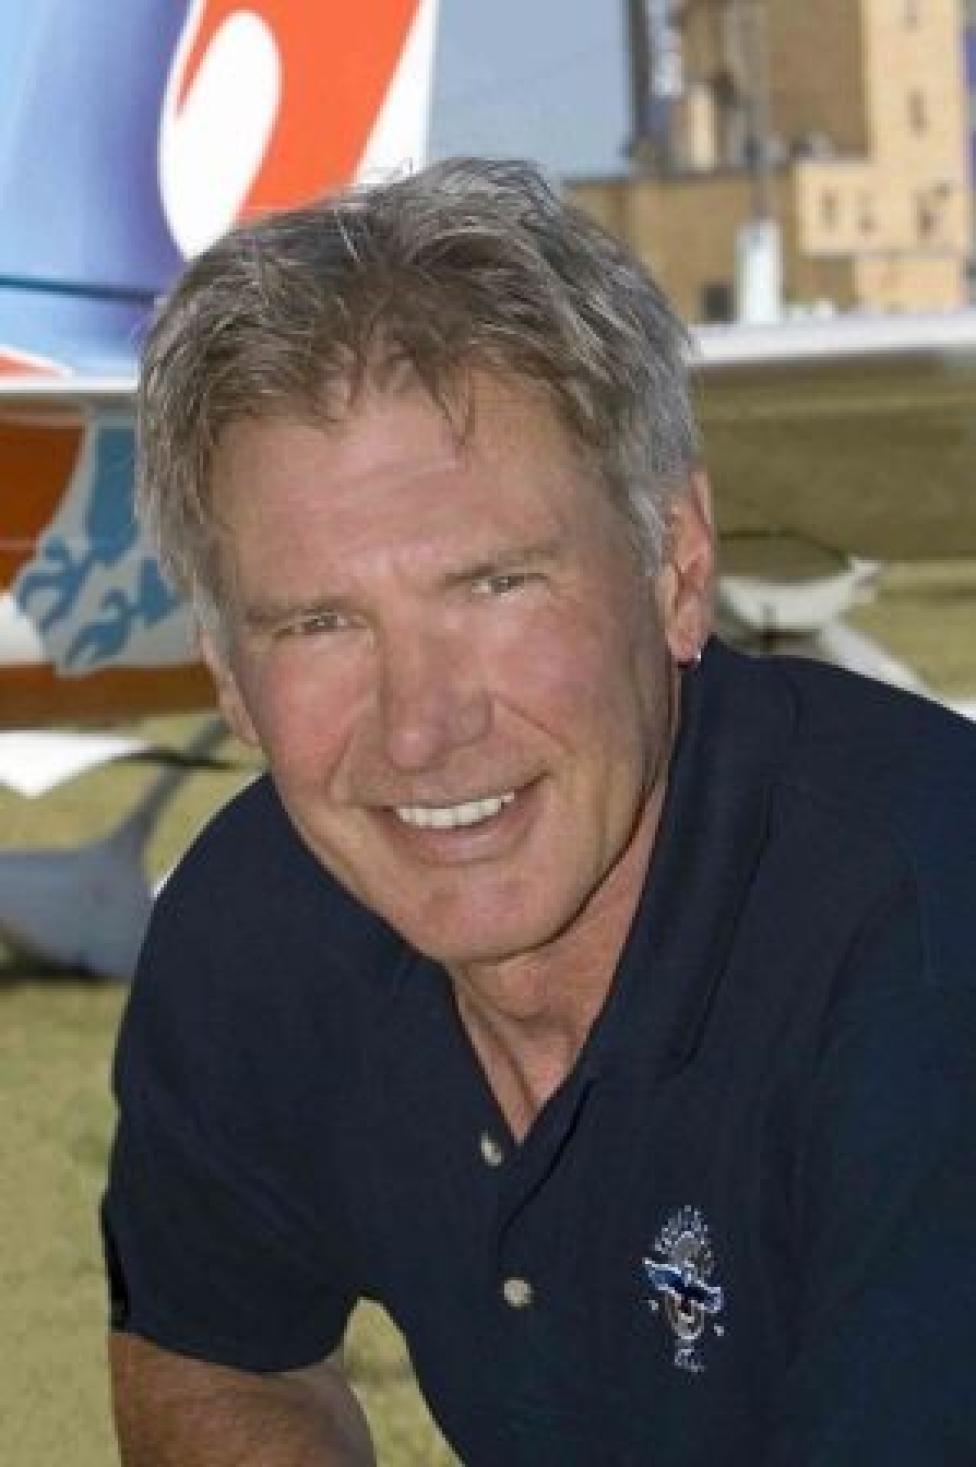 Harrison Ford /fot.: www.youngeagles.org